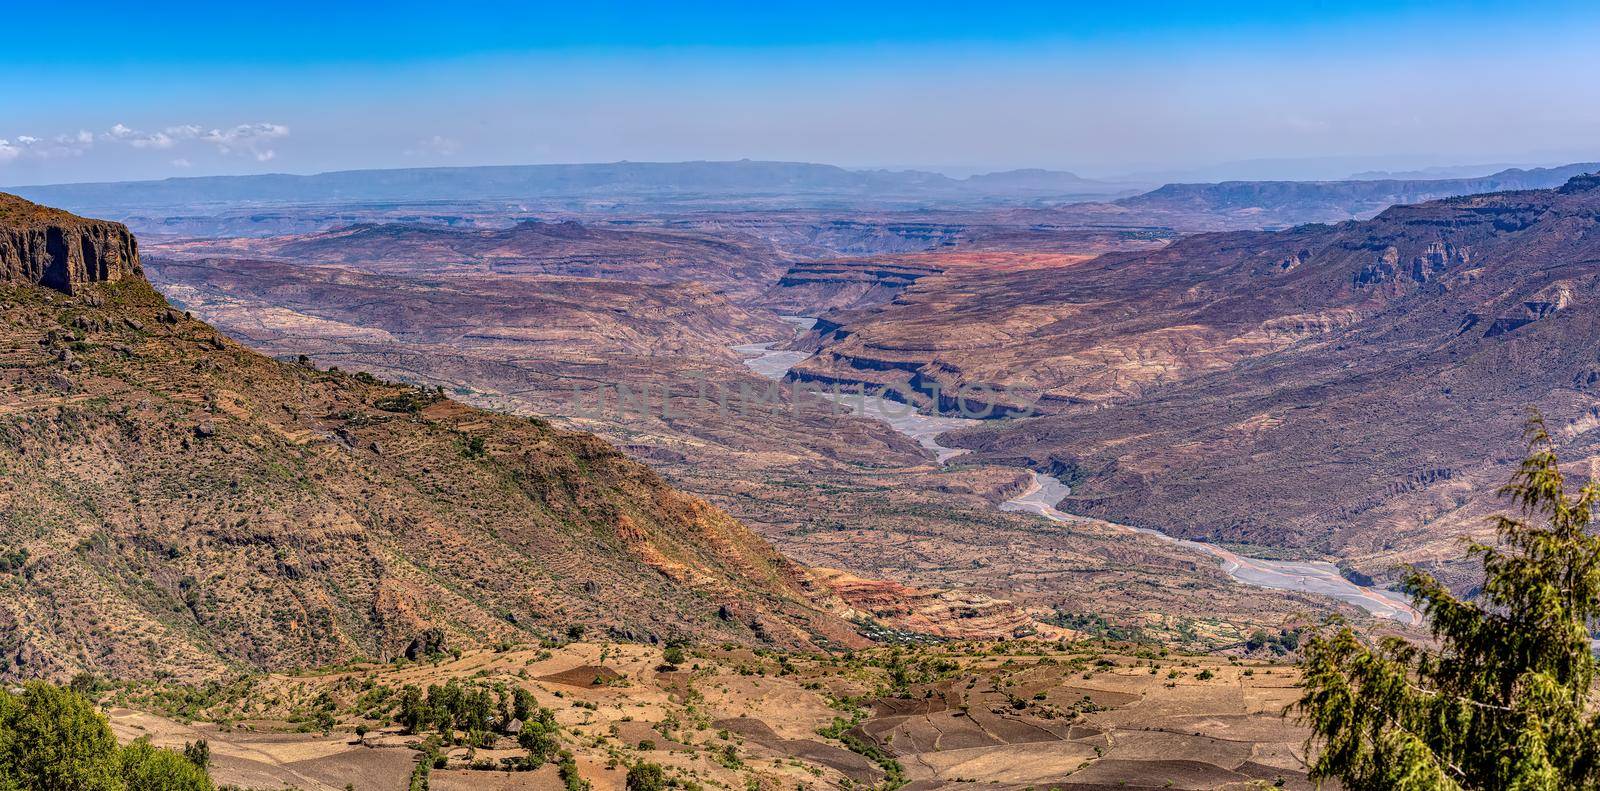 Beautiful wide canyon landscape with dry river bed, Somali Region. Ethiopia wilderness landscape, Africa.